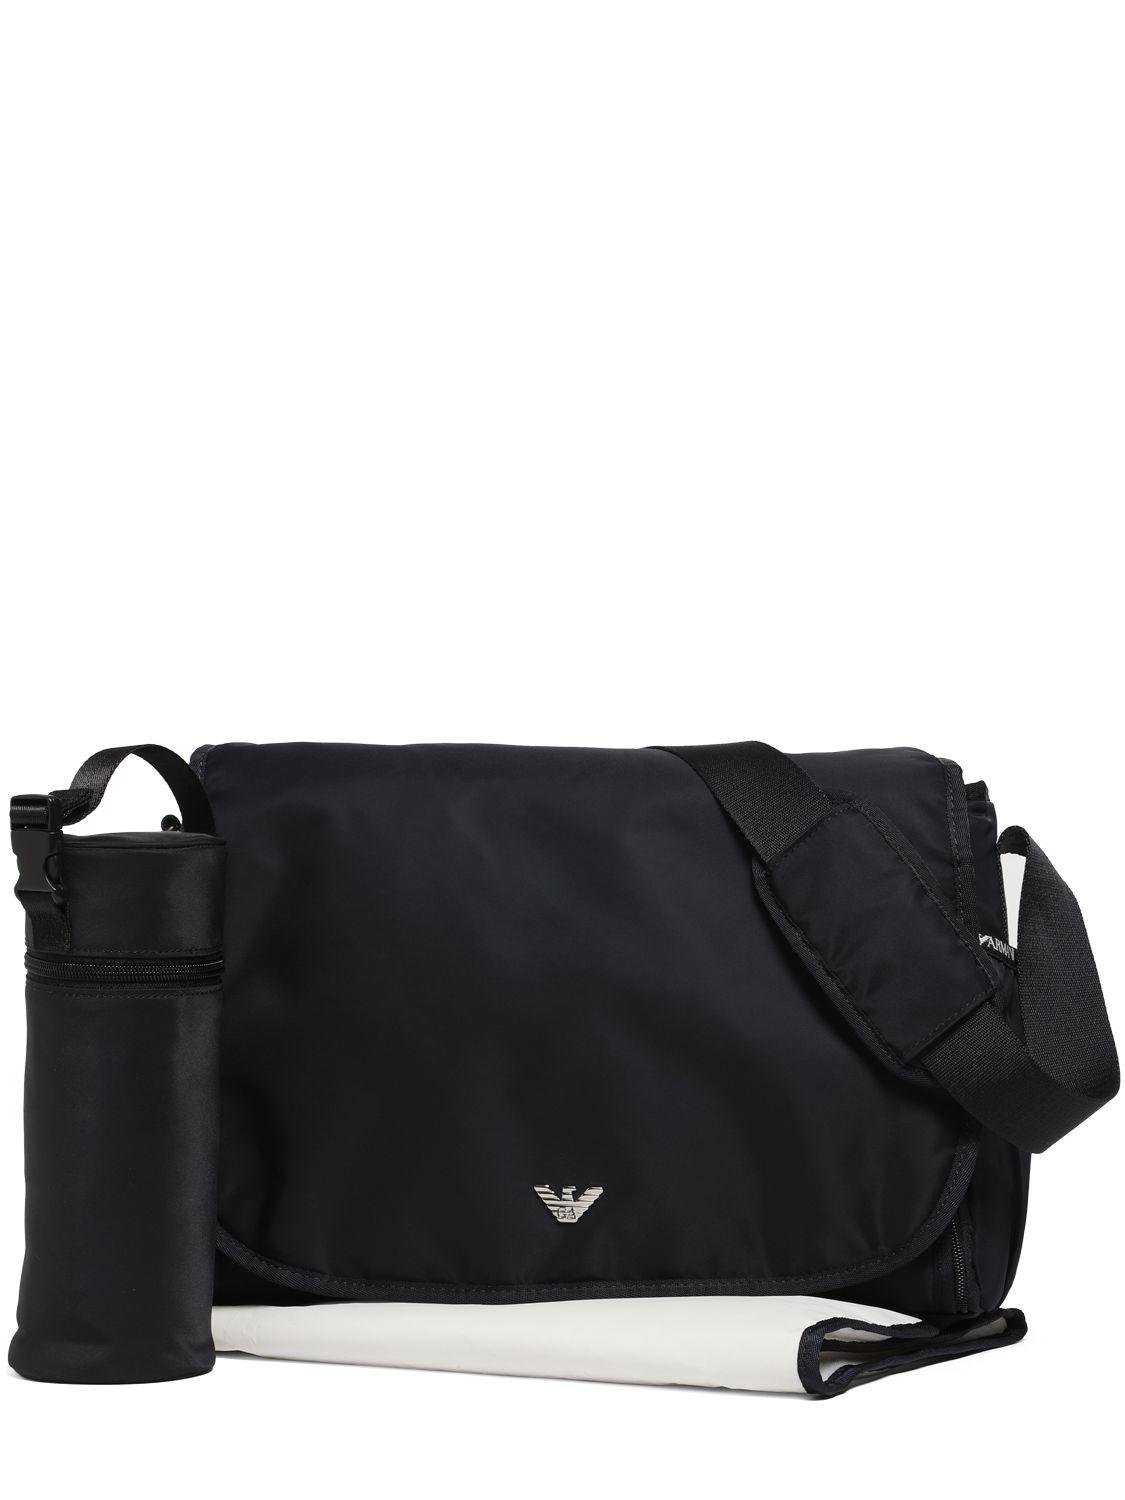 Nylon Changing Bag, Pad & Bottle Holder by EMPORIO ARMANI